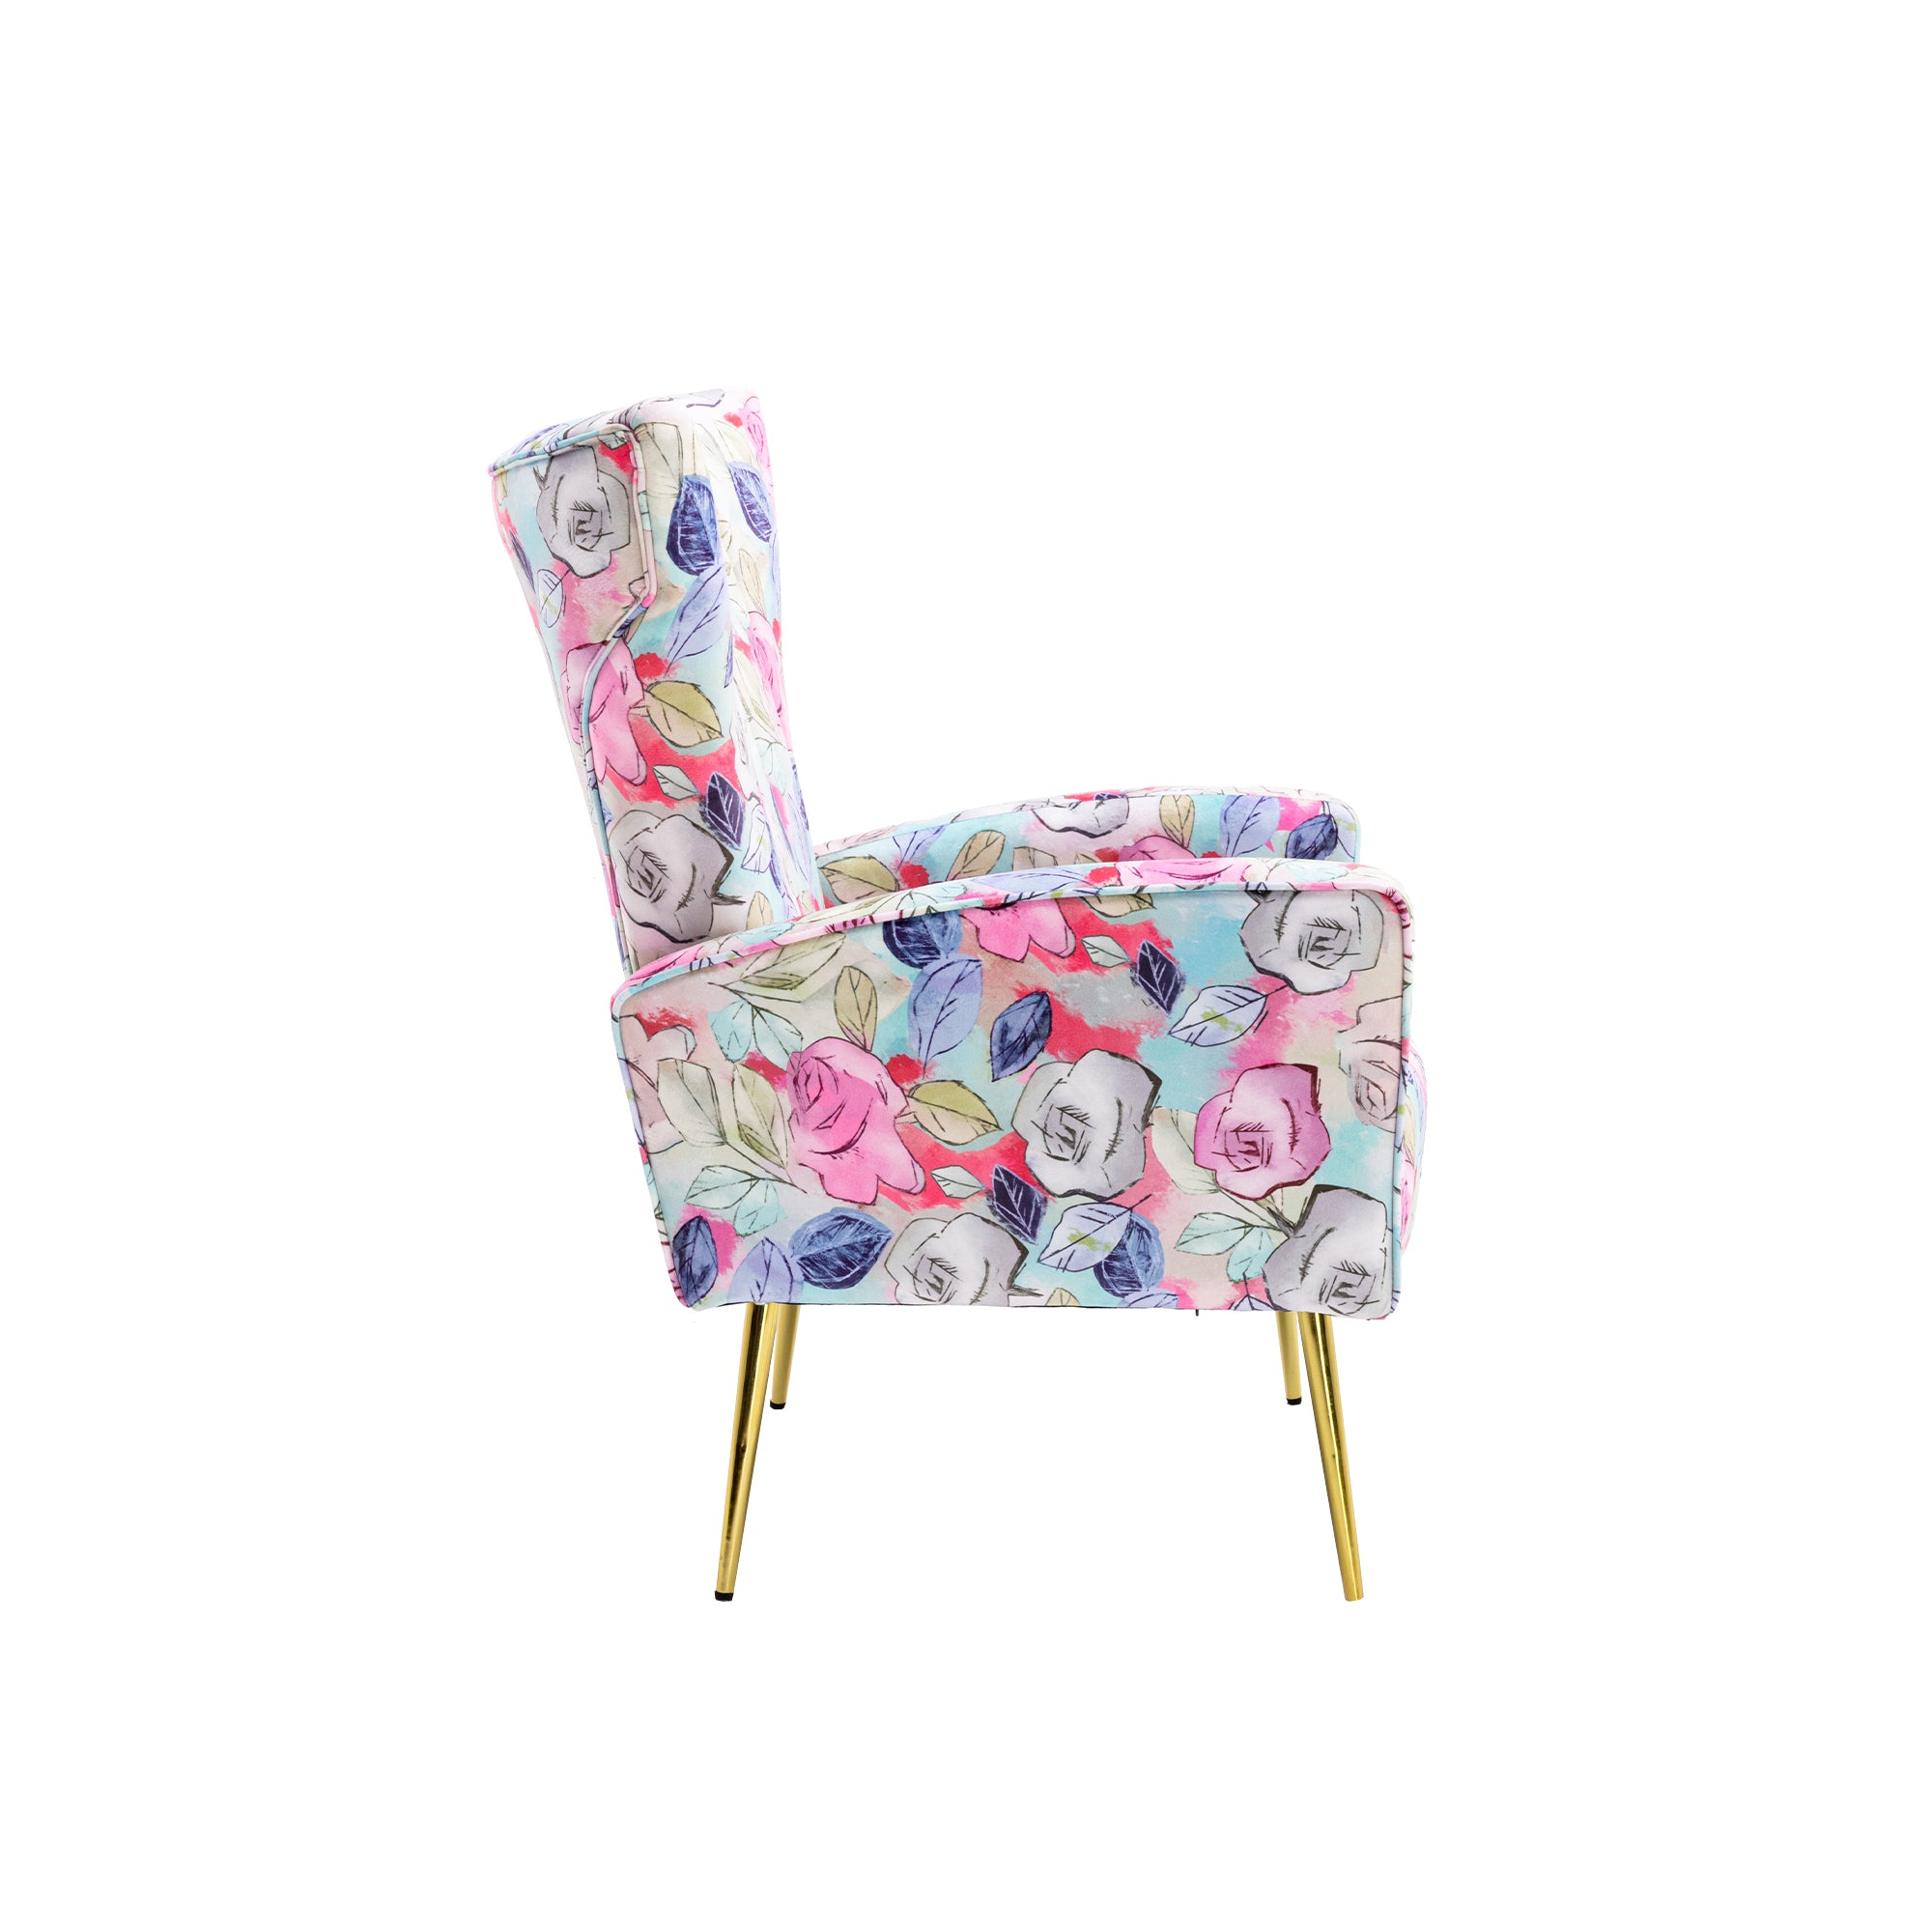 COOLMORE Accent Chair ,leisure single chair with Rose peach-metal